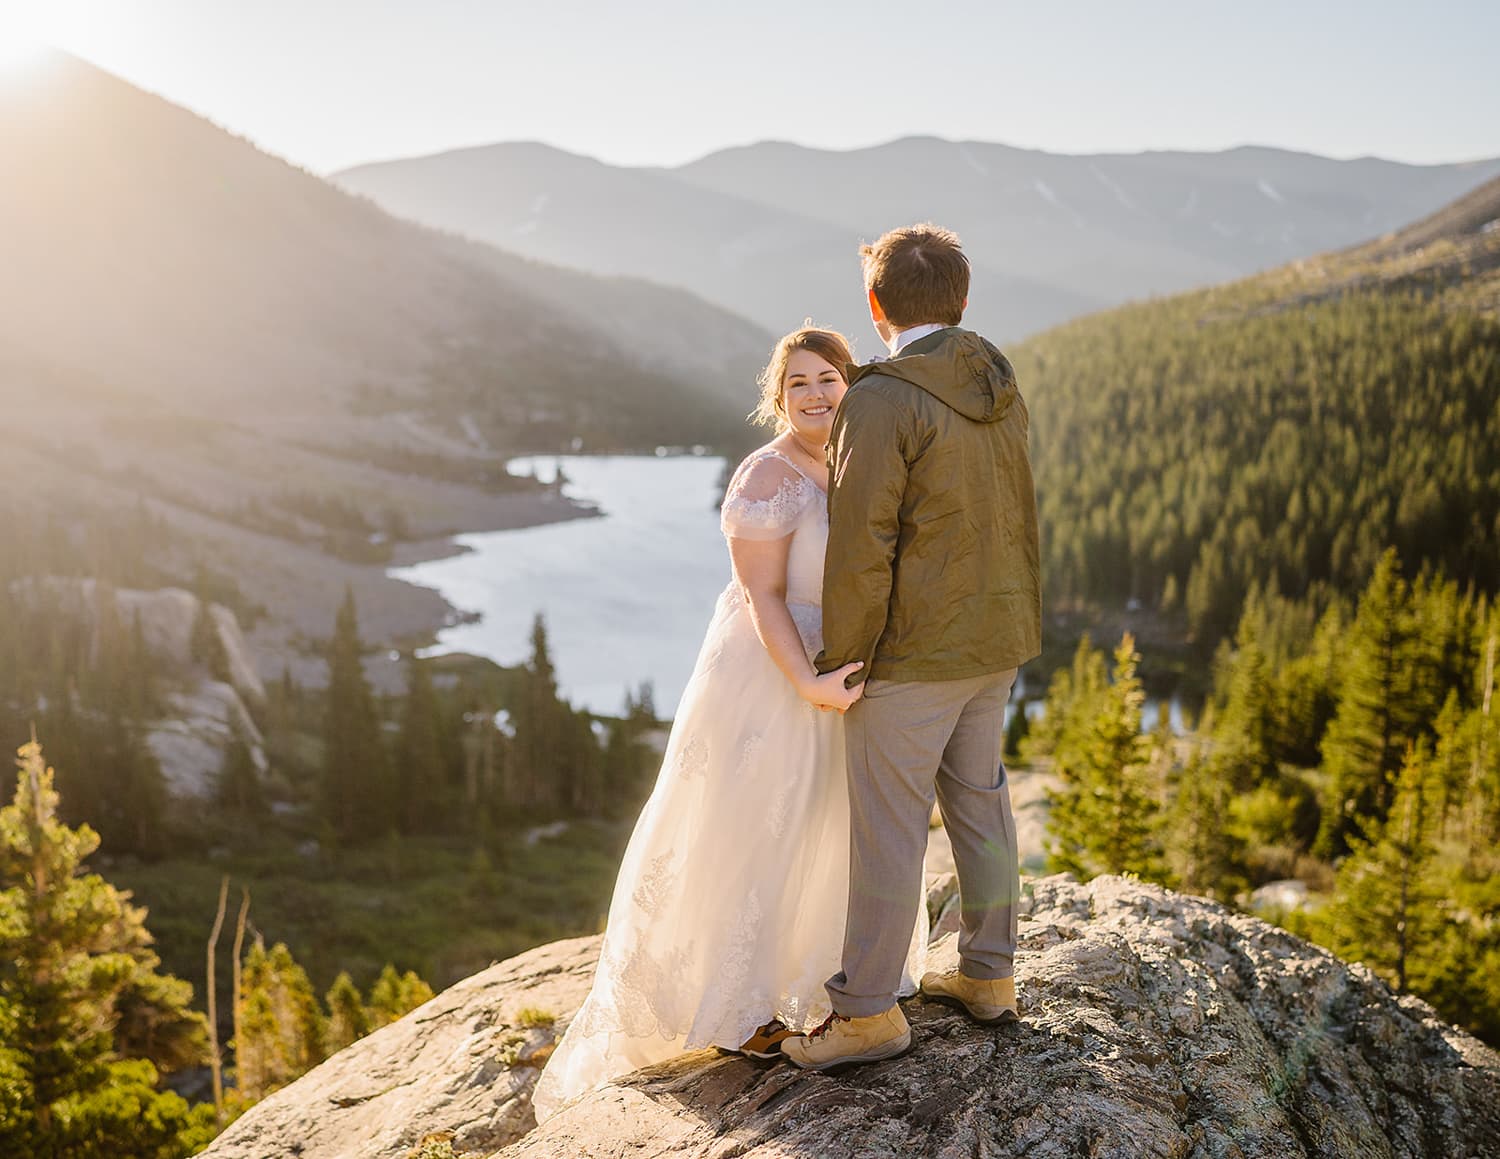 Bride and groom surrounded by the mountains of Breckenridge for their Colorado elopement.